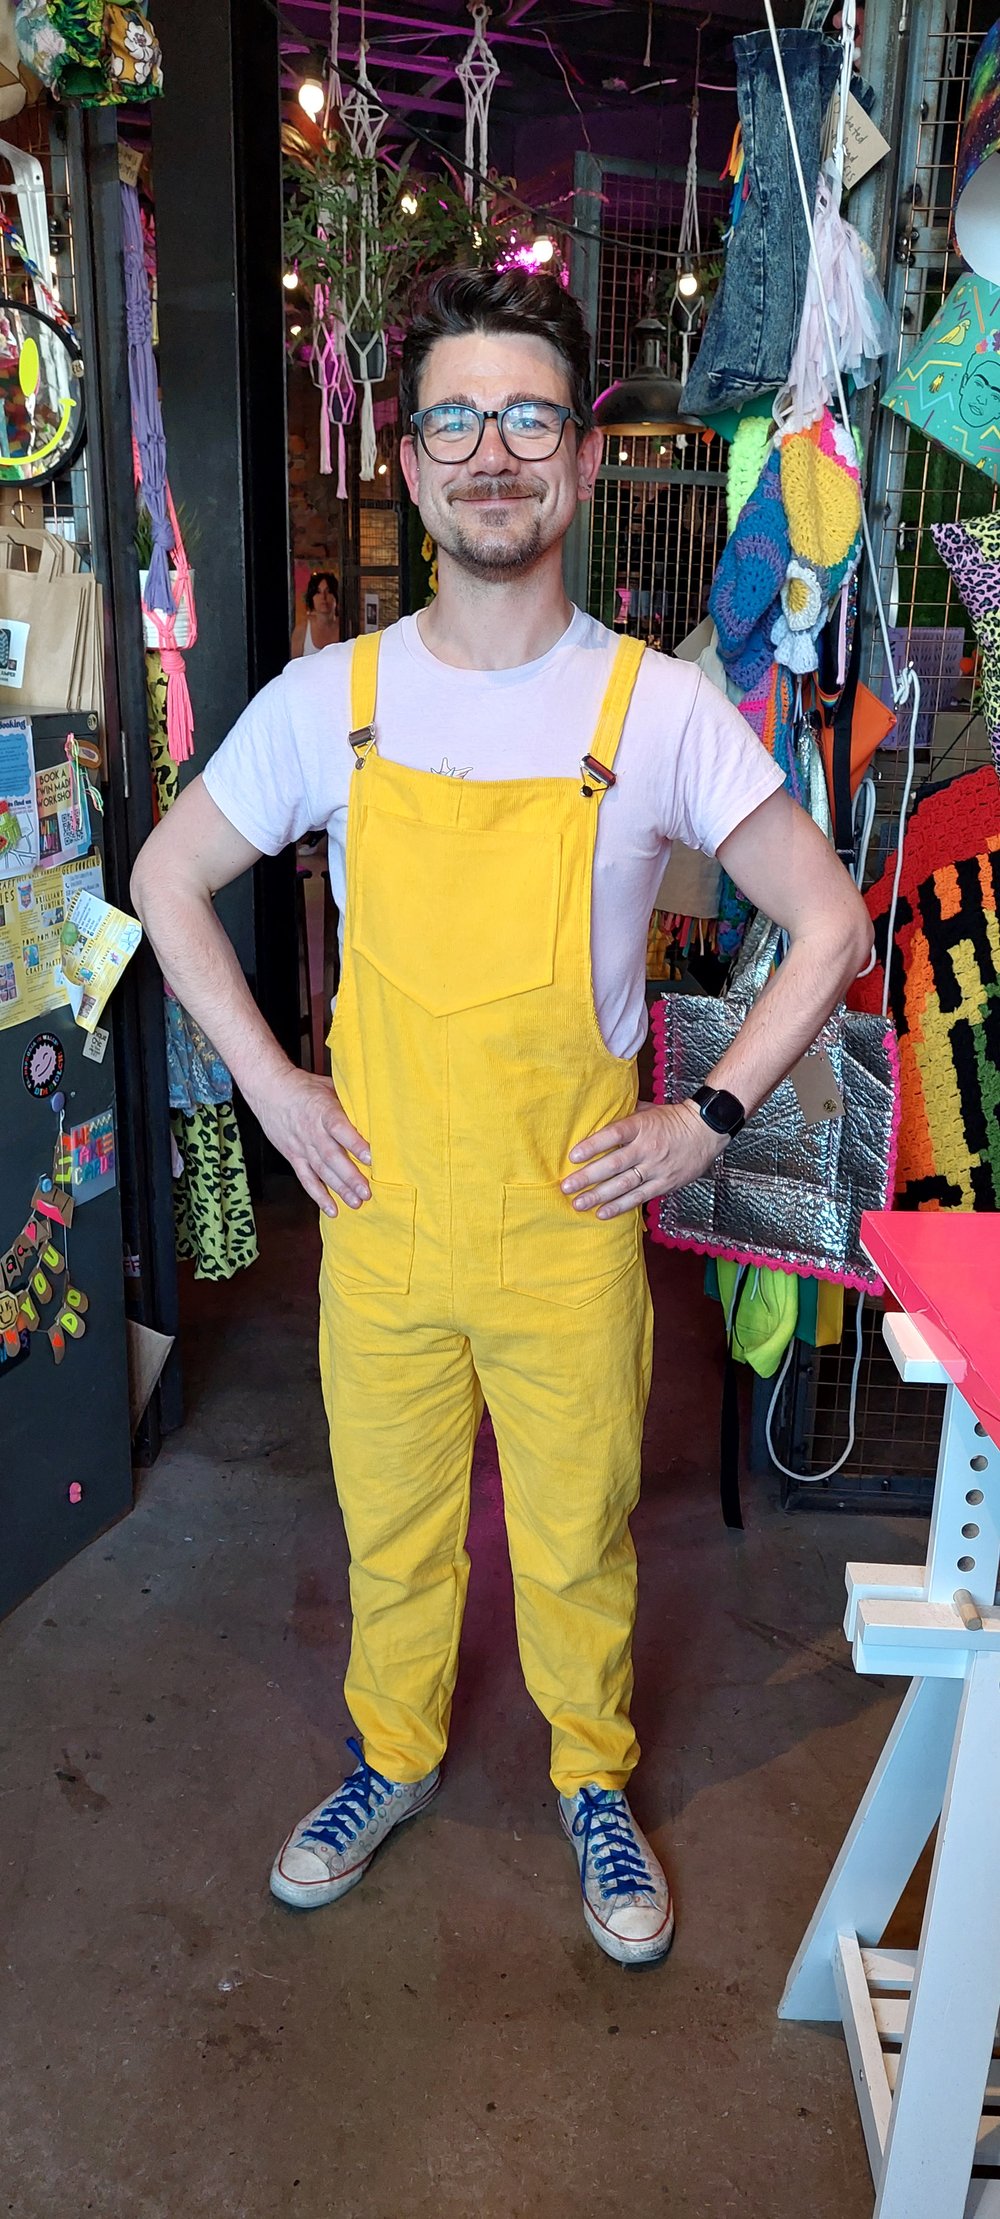 Steve and his dungarees